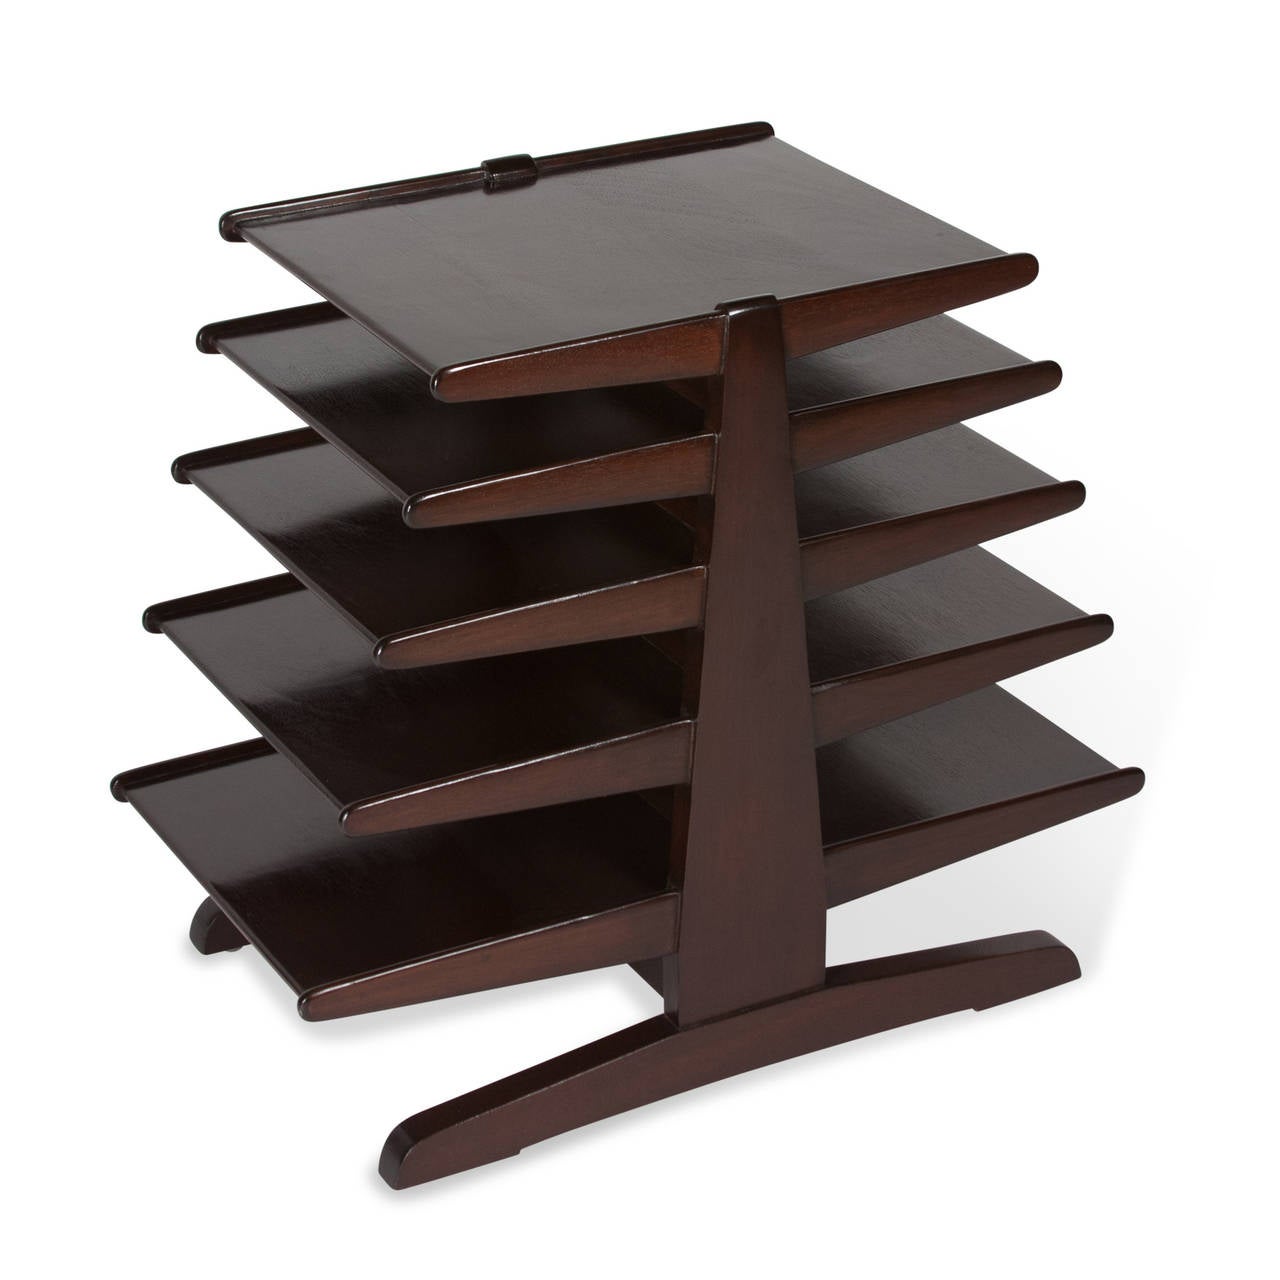 Dark mahogany magazine rack with graduating shelves by Edward Wormley for Dunbar, American 1950s. 28” at widest point, 15 ¼” at deepest point, 24 ¼” h.